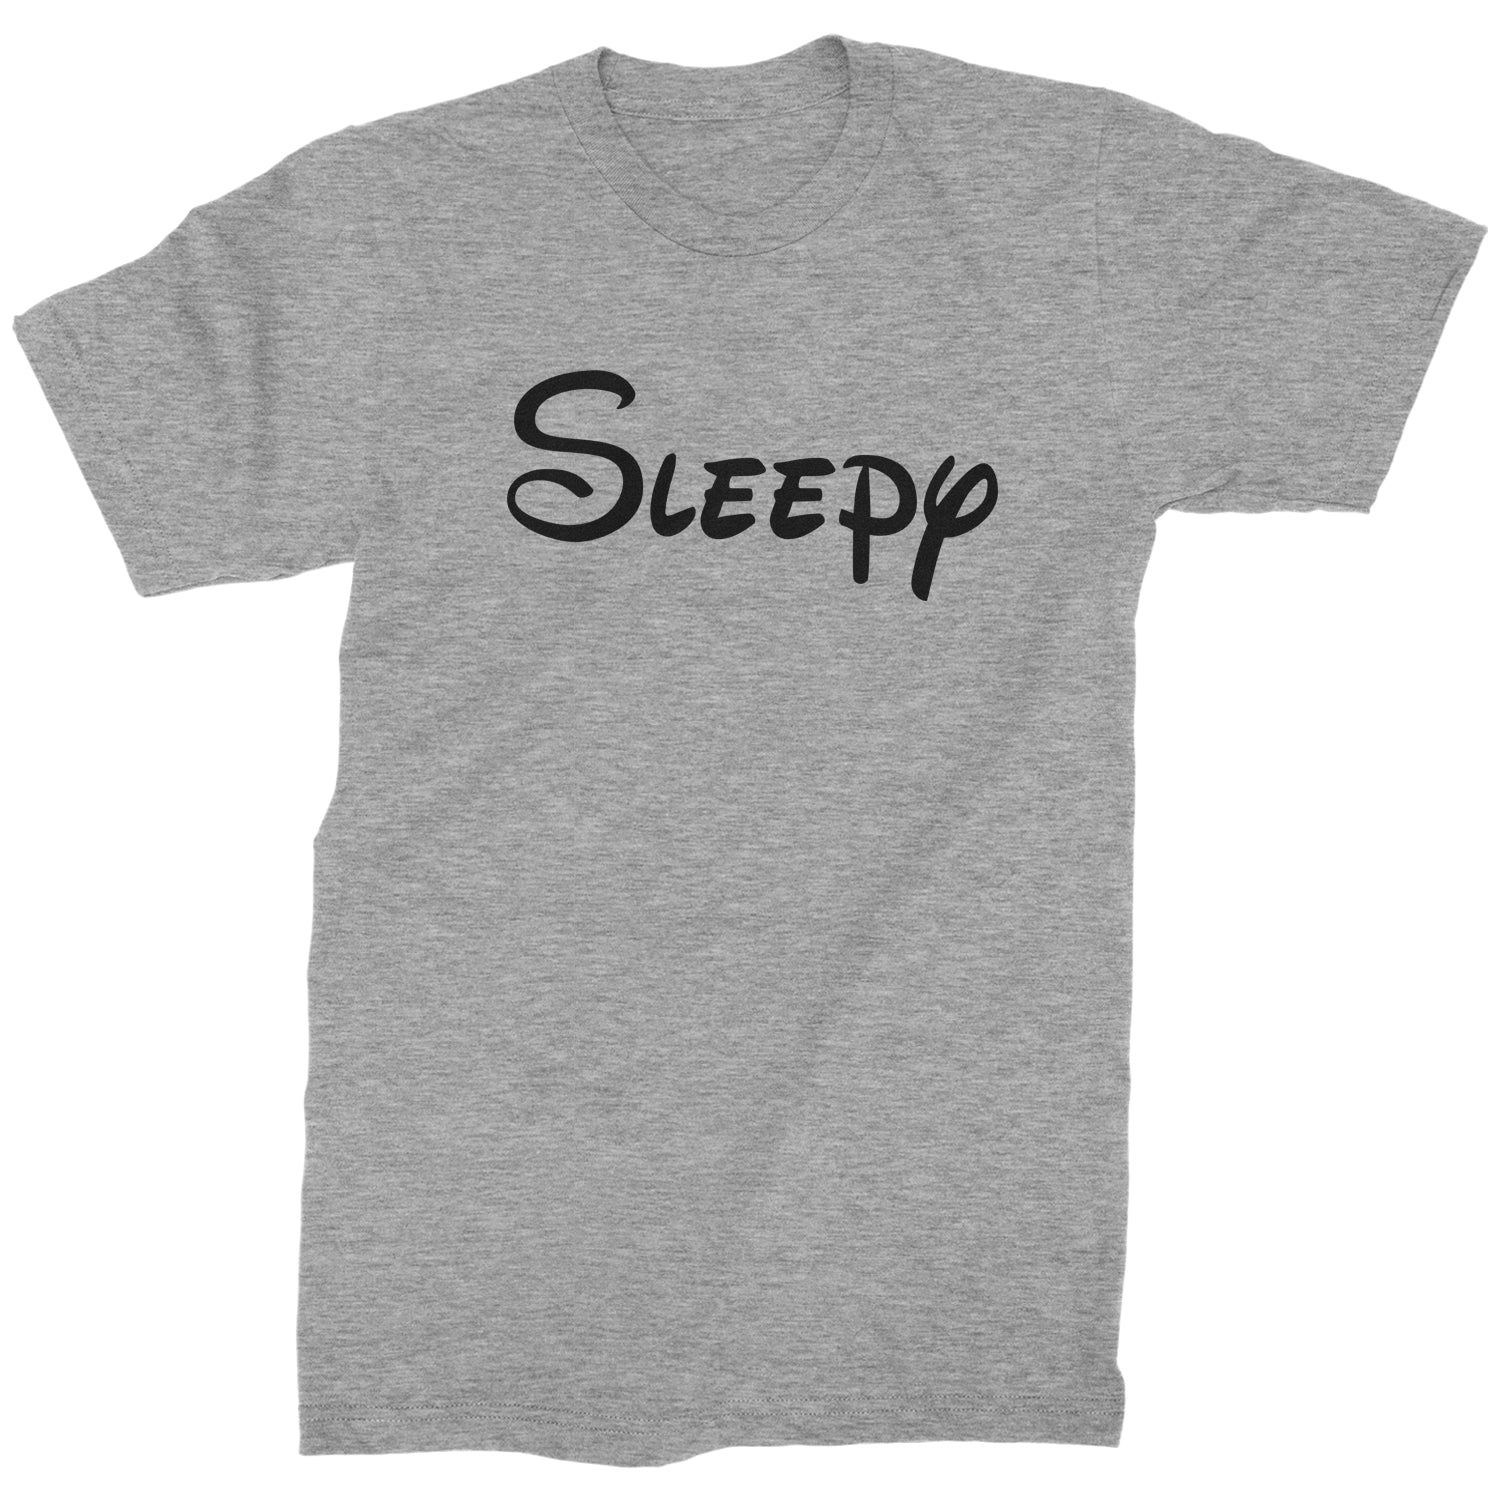 Sleepy - 7 Dwarfs Costume Mens T-shirt and, costume, dwarfs, group, halloween, matching, seven, snow, the, white by Expression Tees